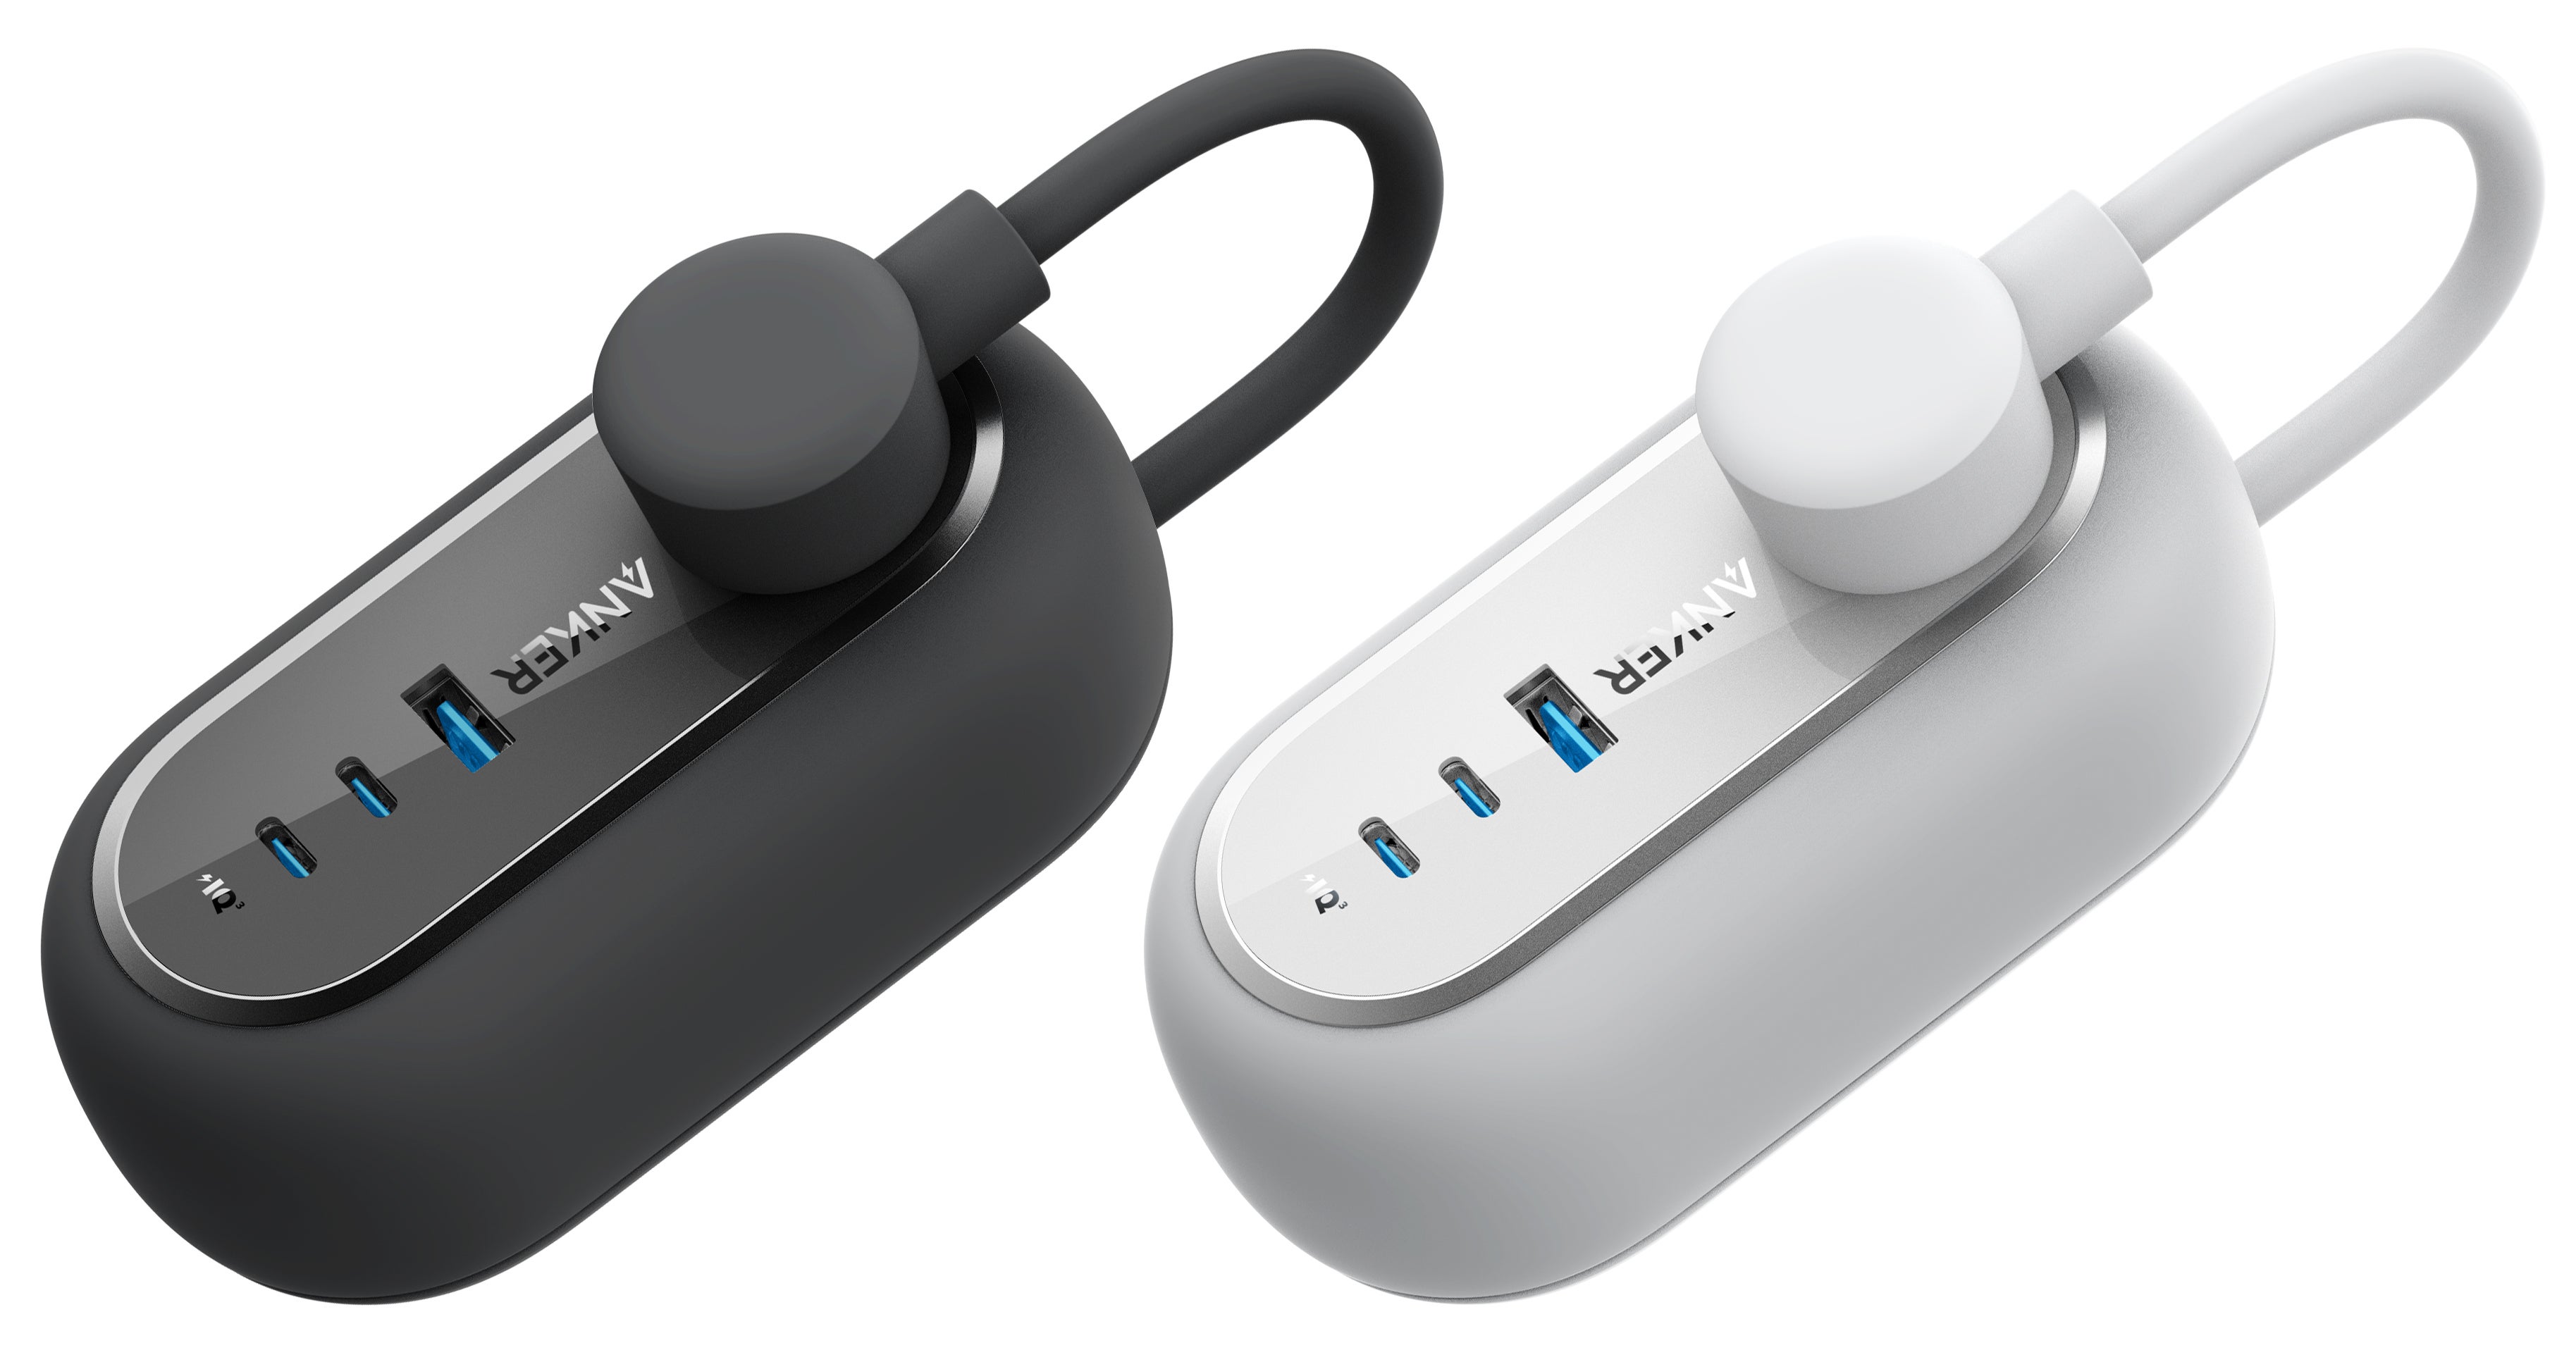 Anker’s New GaN Chargers Can Now Deliver Up to 150W of Power Across Multiple Devices